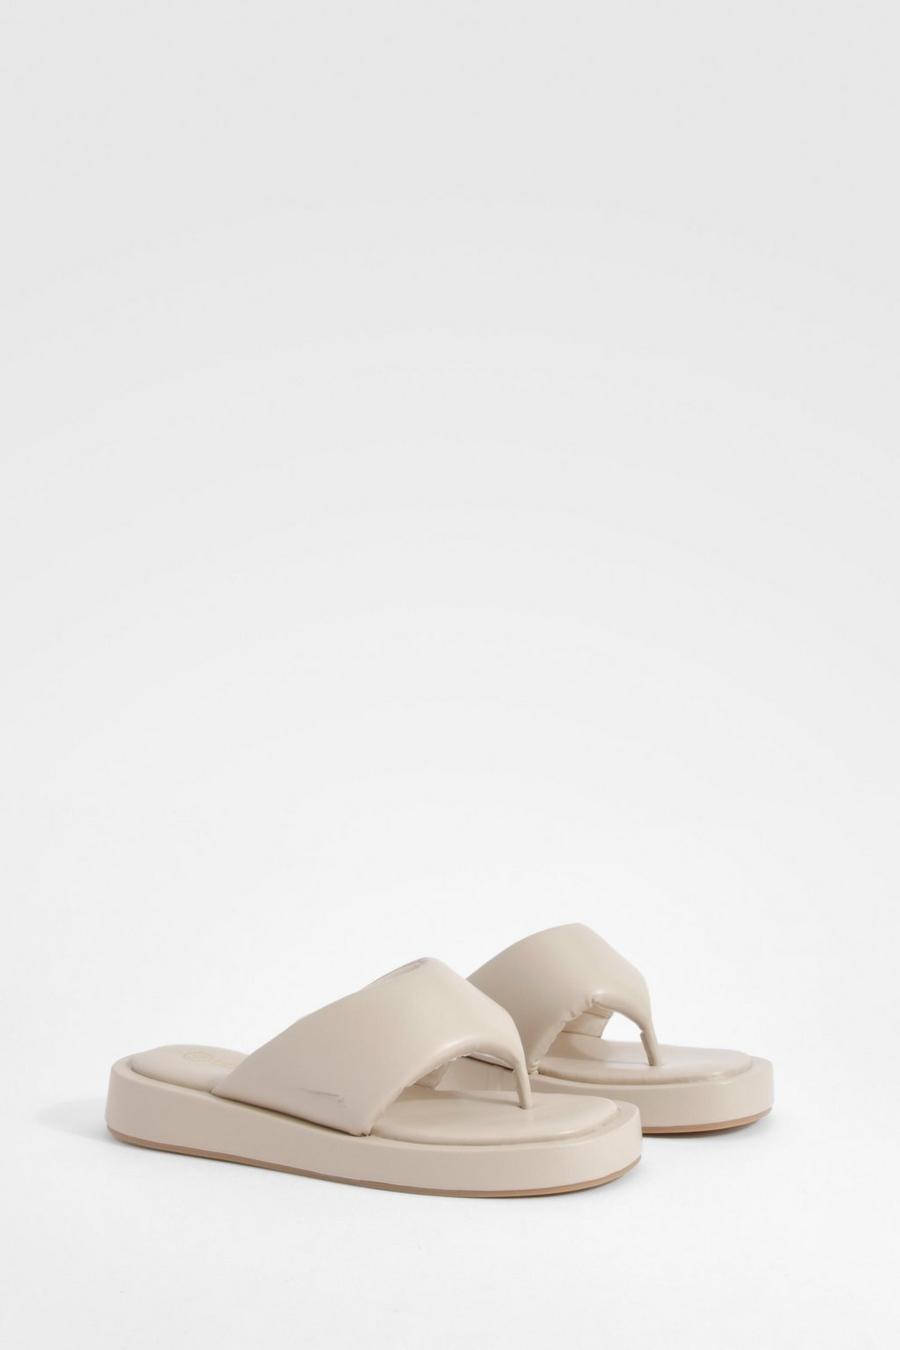 Beige Chunky Padded Flip Flop Sandals